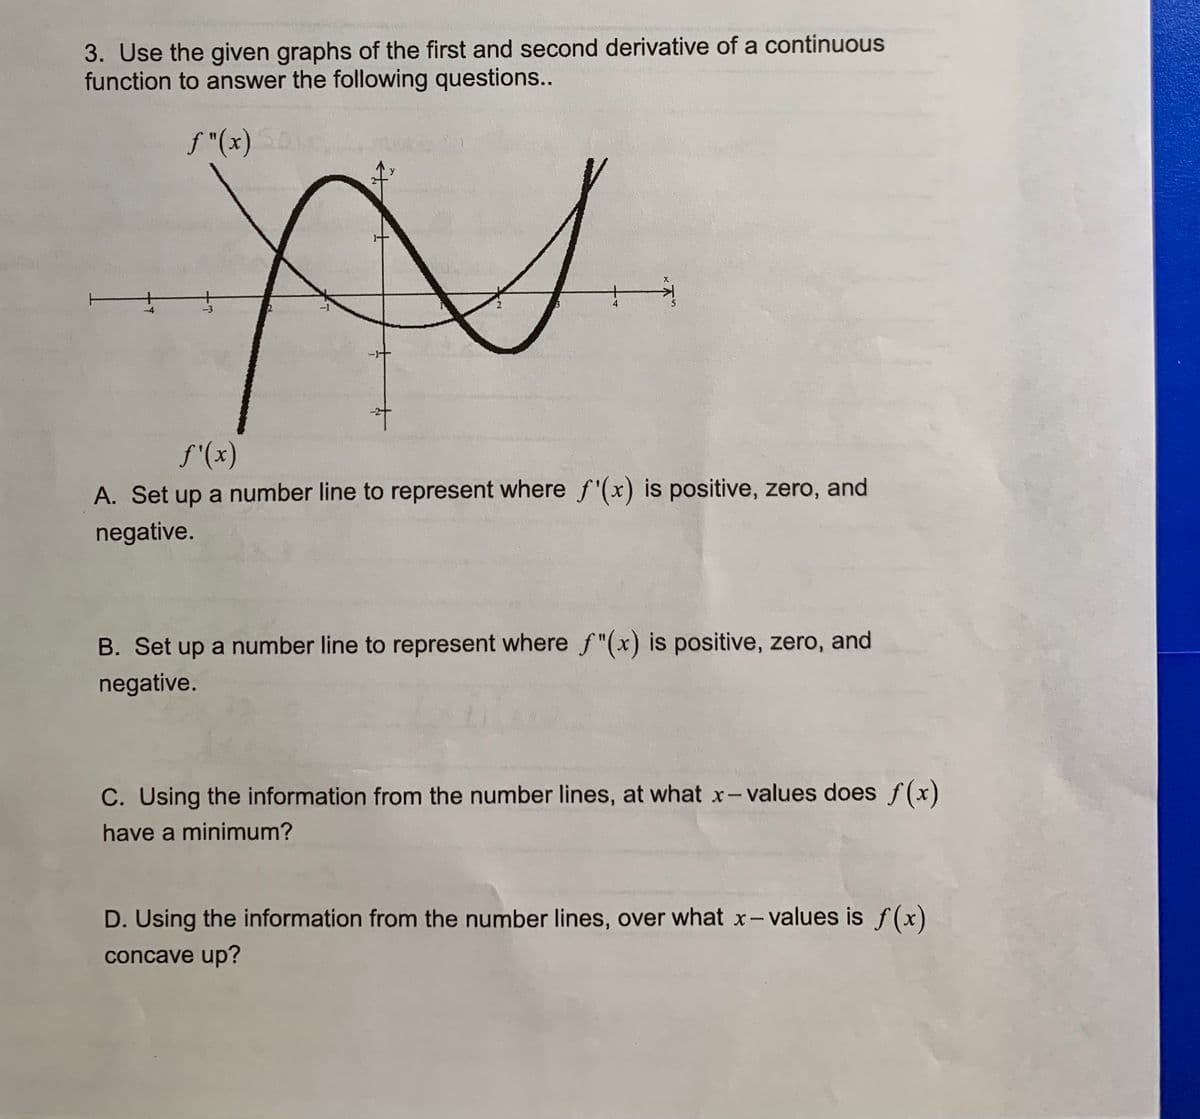 3. Use the given graphs of the first and second derivative of a continuous
function to answer the following questions..
f "(x)
-3
S'(x)
A. Set up a number line to represent where f'(x) is positive, zero, and
negative.
B. Set up a number line to represent where f"(x) is positive, zero, and
negative.
C. Using the information from the number lines, at what x-values does f(x)
have a minimum?
D. Using the information from the number lines, over what x- values is f(x)
concave up?
